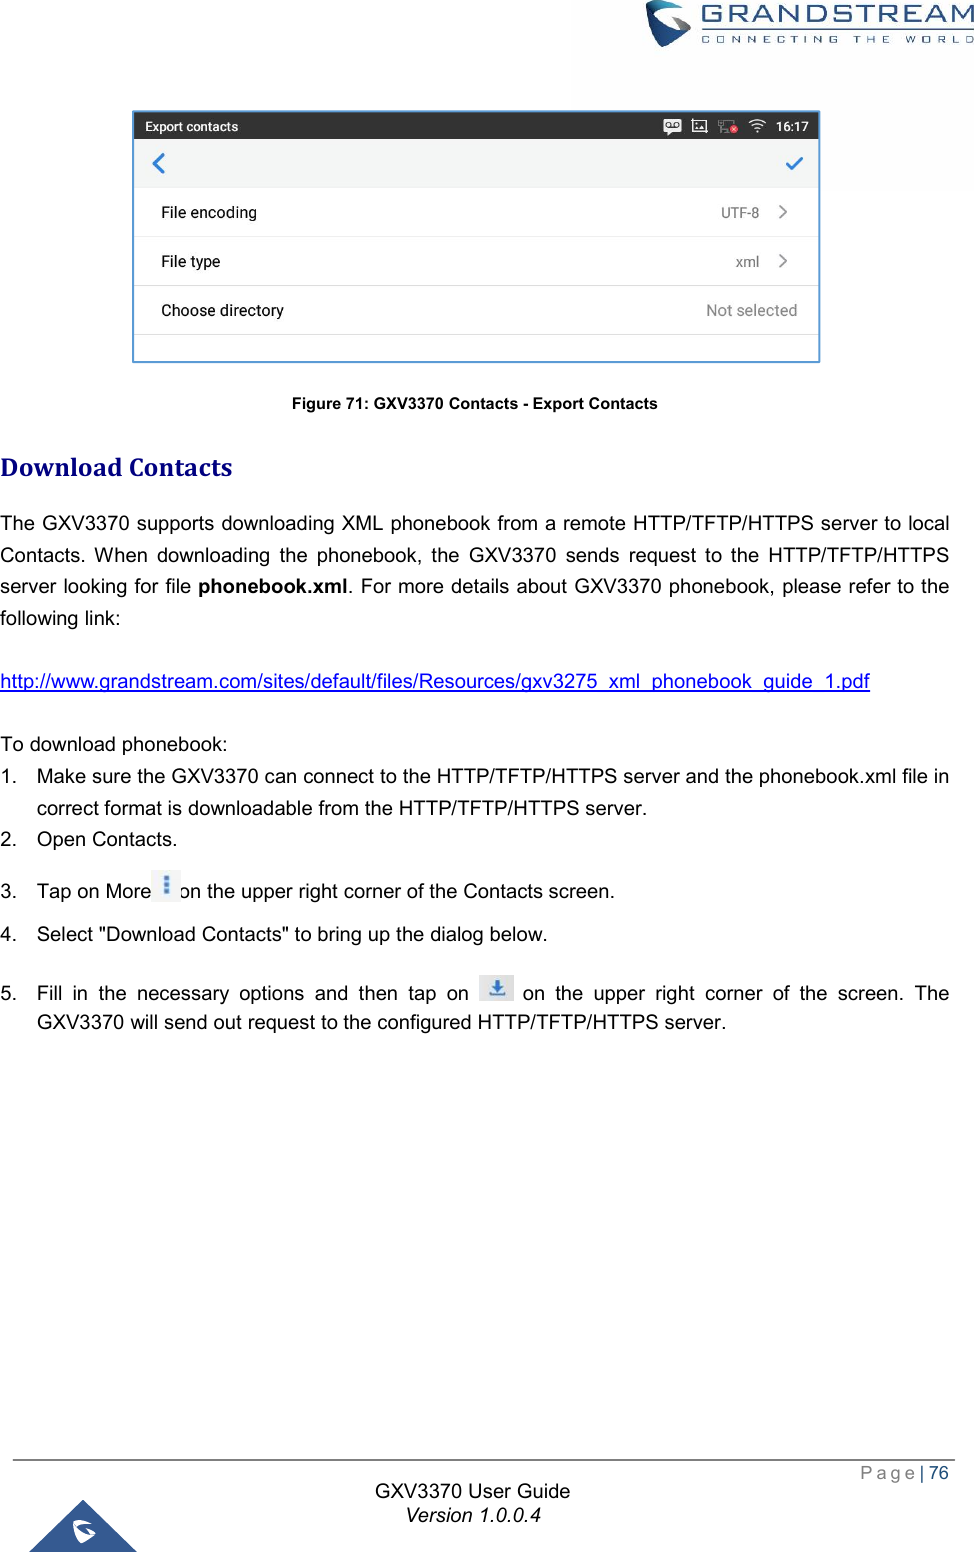  Page| 76  GXV3370 User Guide Version 1.0.0.4   Figure 71: GXV3370 Contacts - Export Contacts Download Contacts The GXV3370 supports downloading XML phonebook from a remote HTTP/TFTP/HTTPS server to local Contacts. When downloading the phonebook, the GXV3370 sends request to the HTTP/TFTP/HTTPS server looking for file phonebook.xml. For more details about GXV3370 phonebook, please refer to the following link:  http://www.grandstream.com/sites/default/files/Resources/gxv3275_xml_phonebook_guide_1.pdf  To download phonebook: 1. Make sure the GXV3370 can connect to the HTTP/TFTP/HTTPS server and the phonebook.xml file in correct format is downloadable from the HTTP/TFTP/HTTPS server. 2. Open Contacts. 3. Tap on More on the upper right corner of the Contacts screen. 4. Select &quot;Download Contacts&quot; to bring up the dialog below. 5. Fill in the necessary options and then tap on   on the upper right corner of the screen. The GXV3370 will send out request to the configured HTTP/TFTP/HTTPS server.  